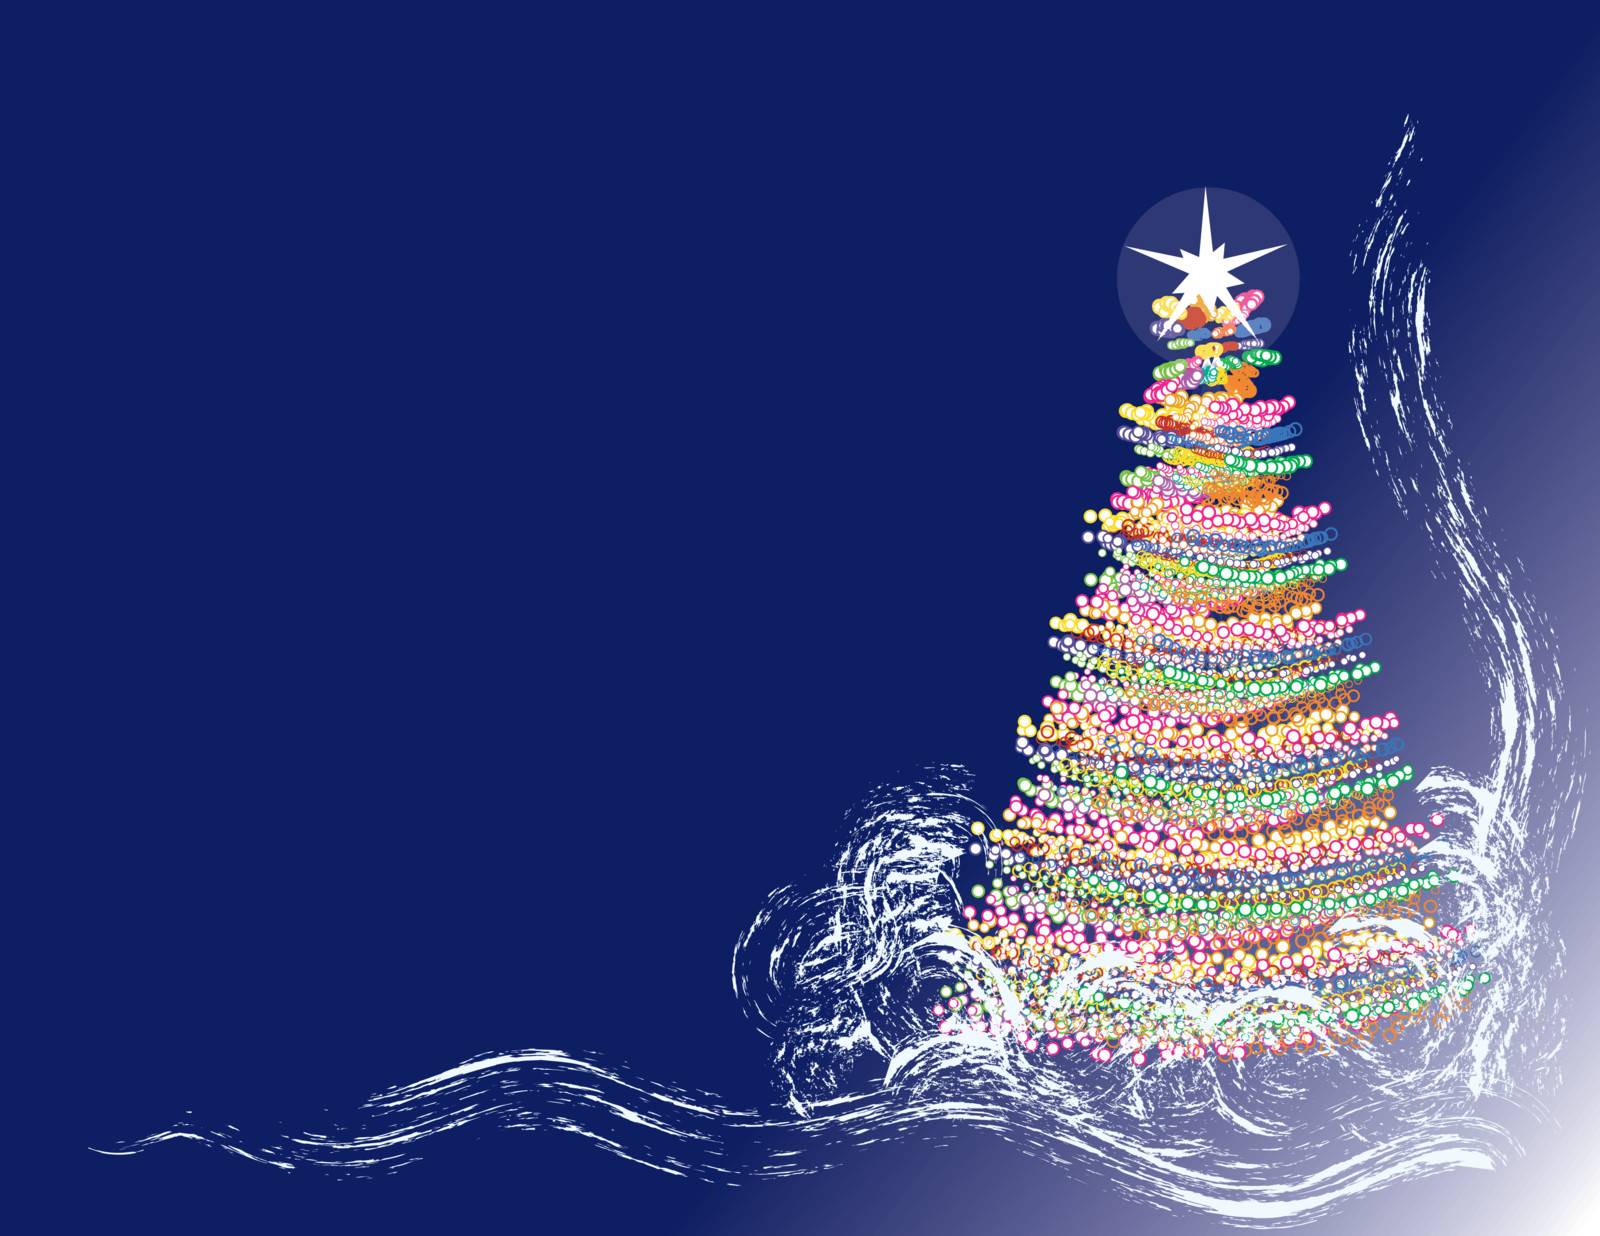 New-year background with a fir-tree and snow